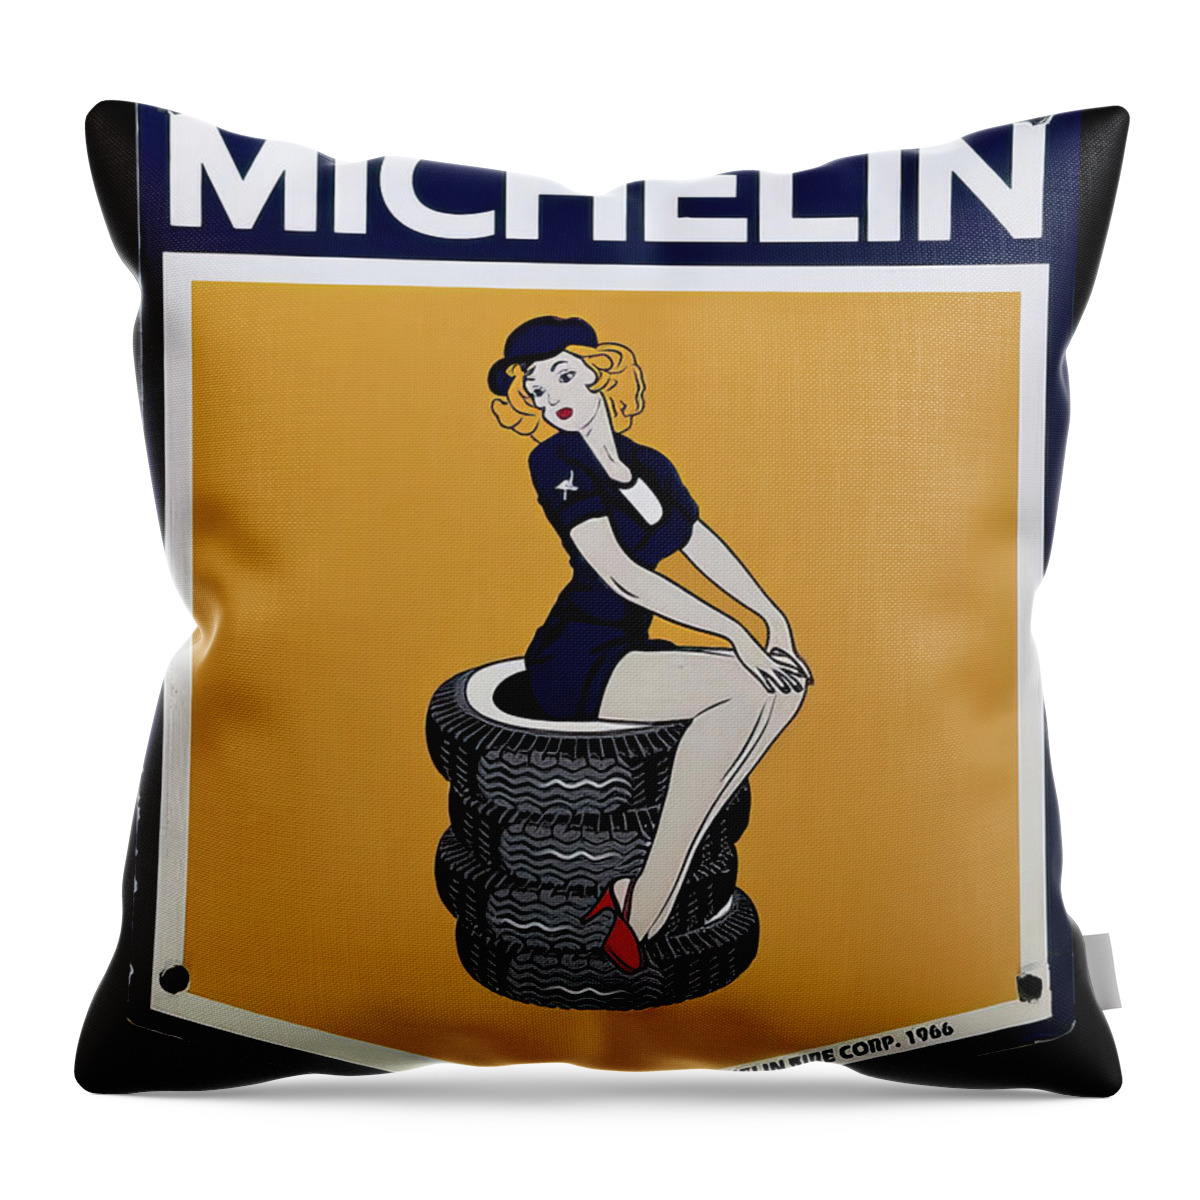 Michelin Throw Pillow featuring the photograph Michelin Vintage sign by Flees Photos